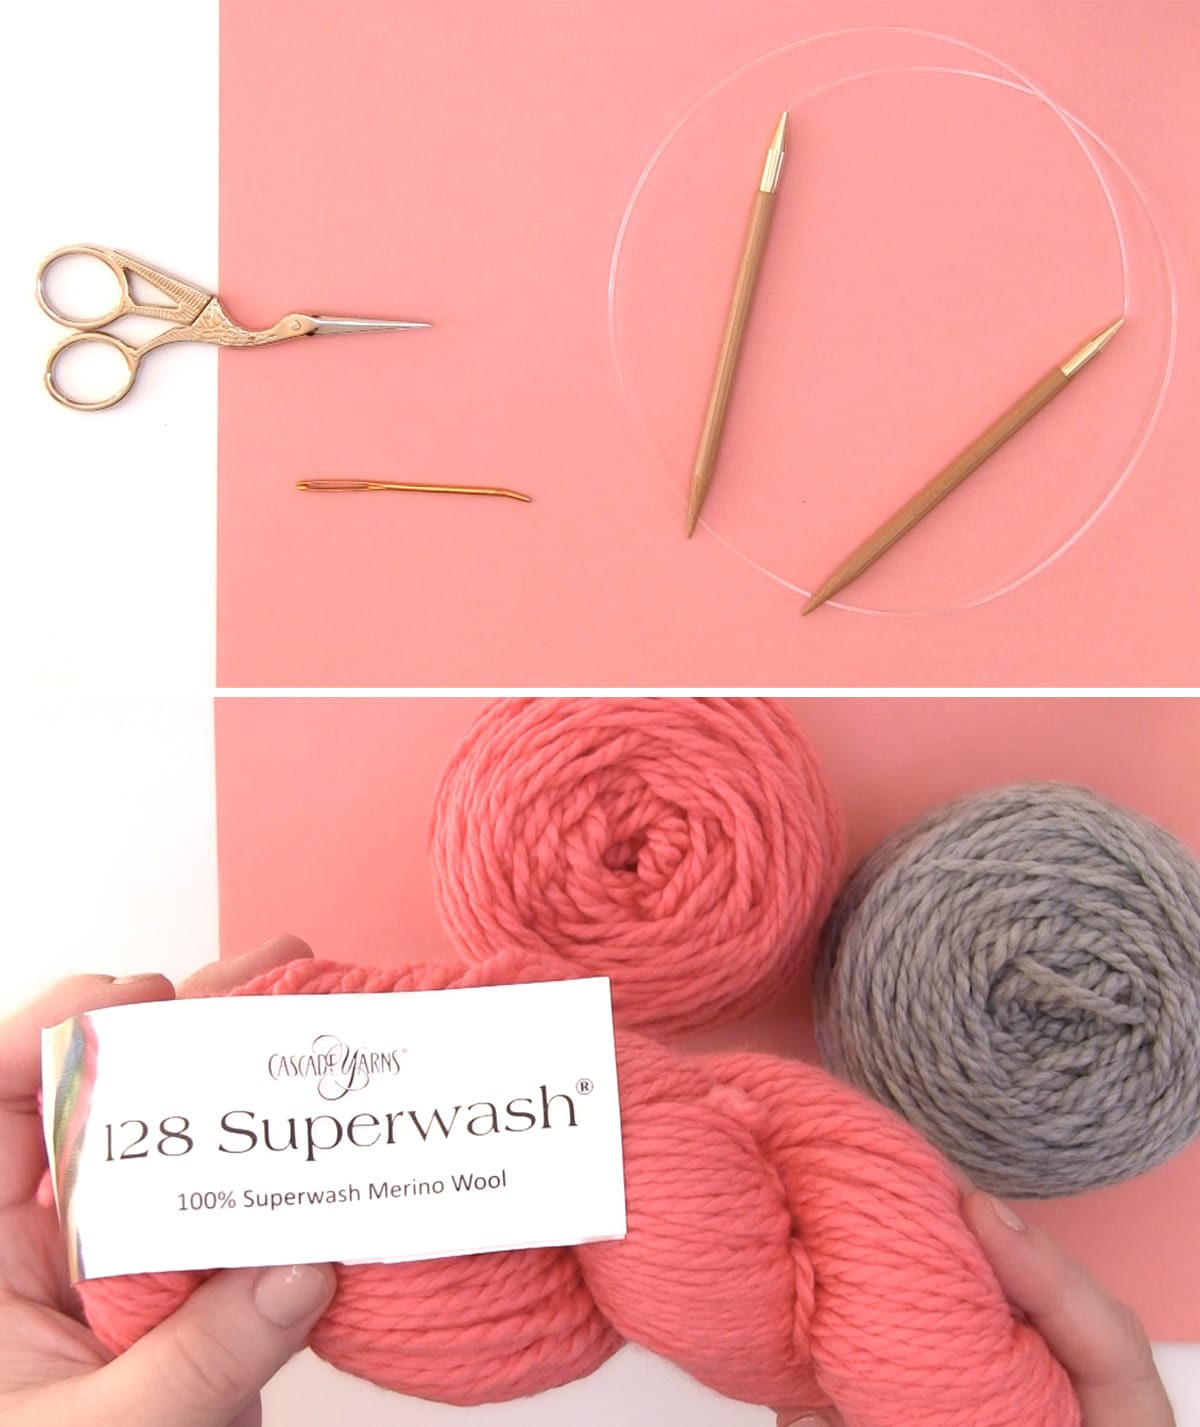 Knitting supplies of circular knitting needles, scissors, a tapestry needle, and Cascade 128 yarn in peach and grey colors.